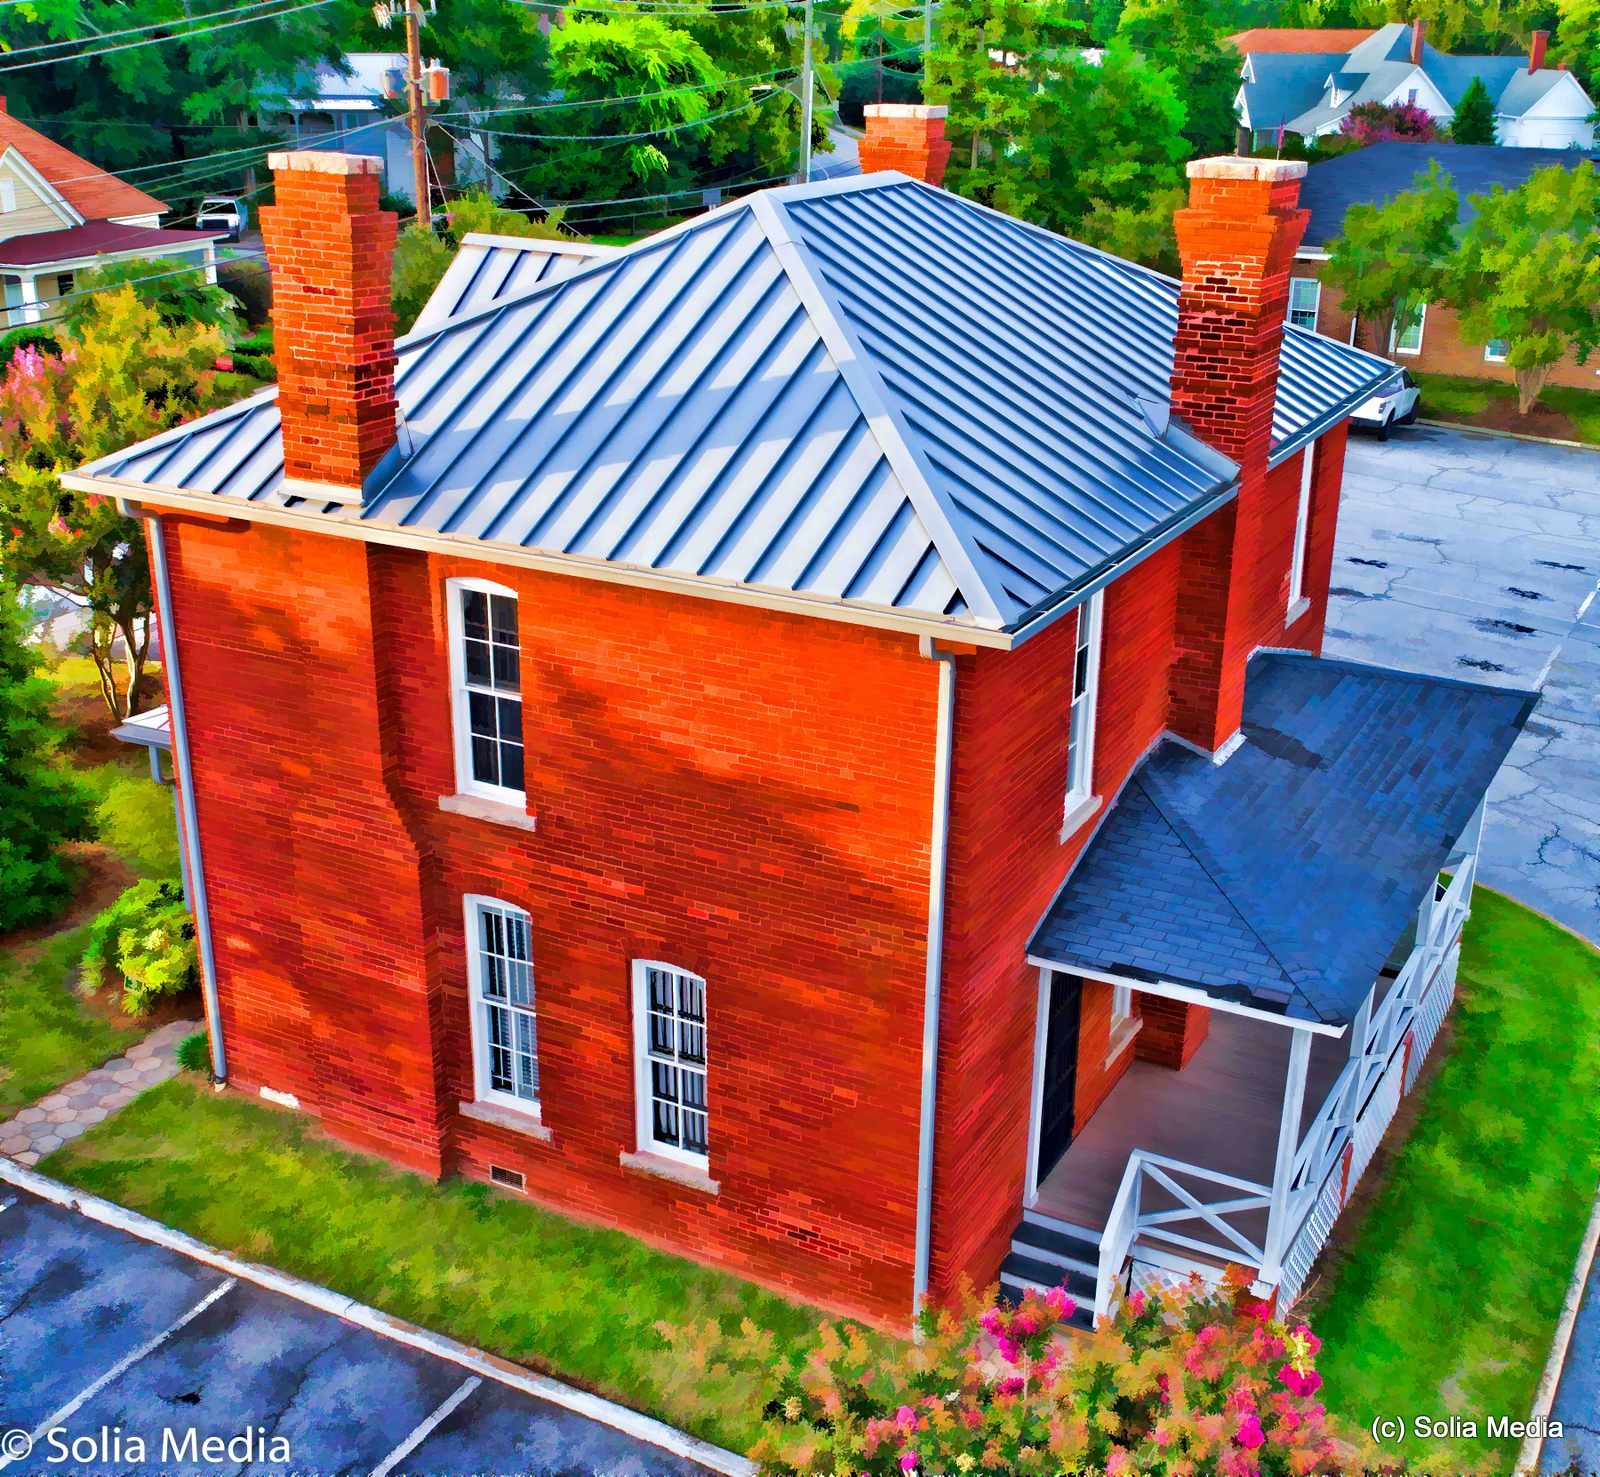 Solia Media Drone Work - Old Jail, Conyers, GA